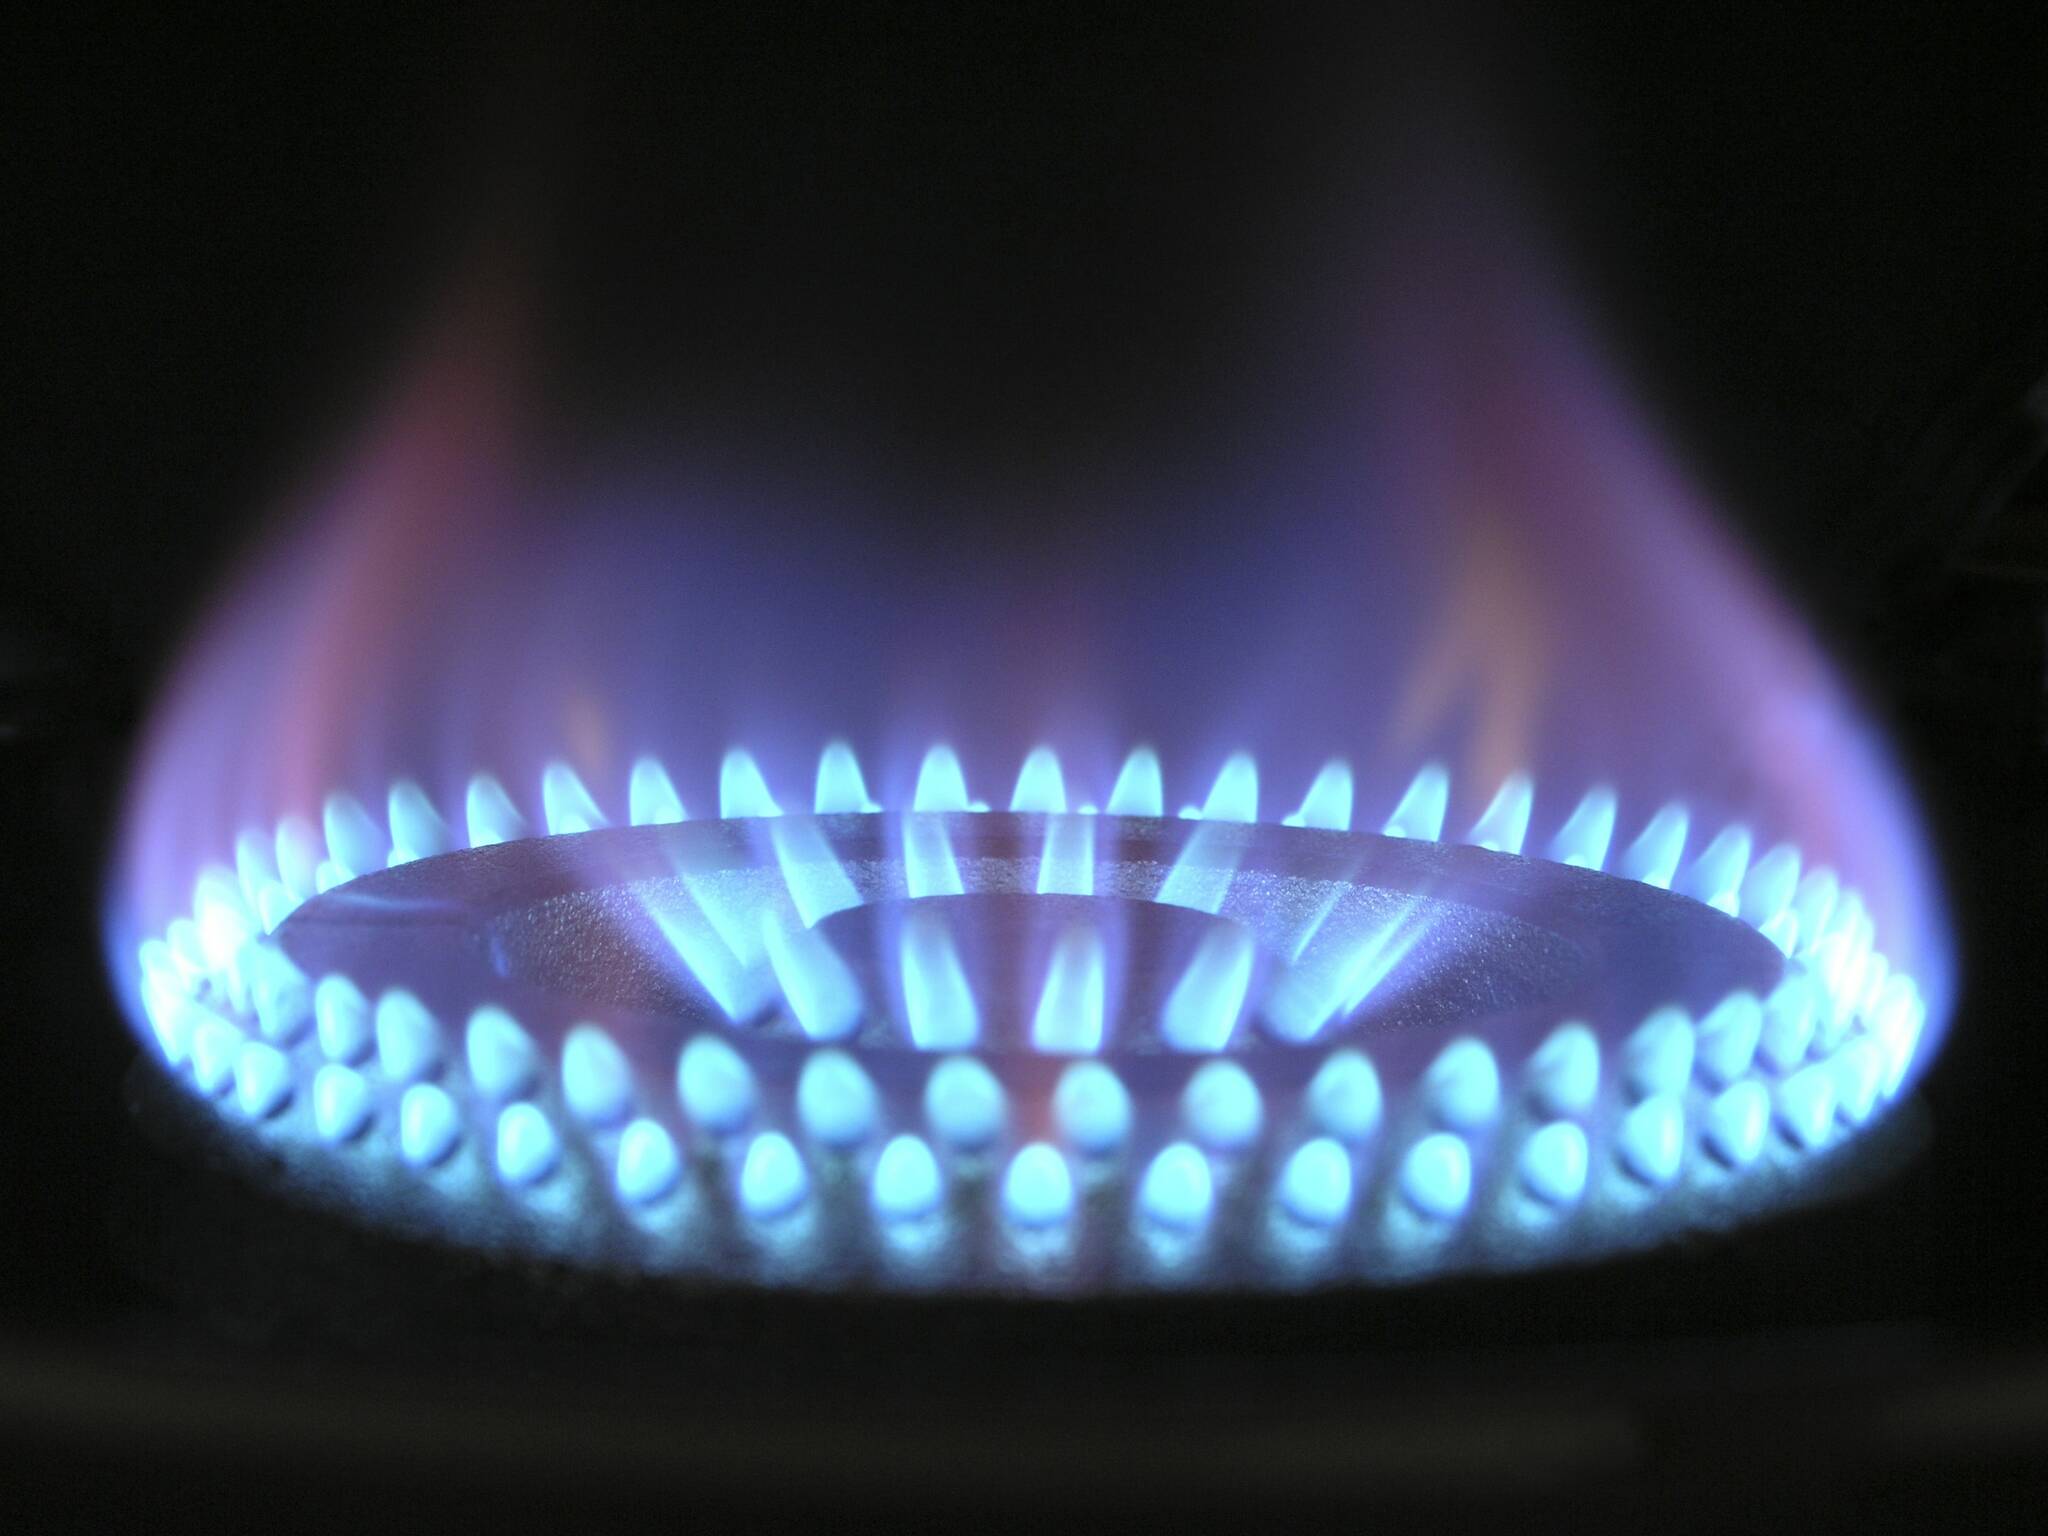 Many houses use natural gas for heating, generating electricity and stovetop cooking. Photo via Pixabay.